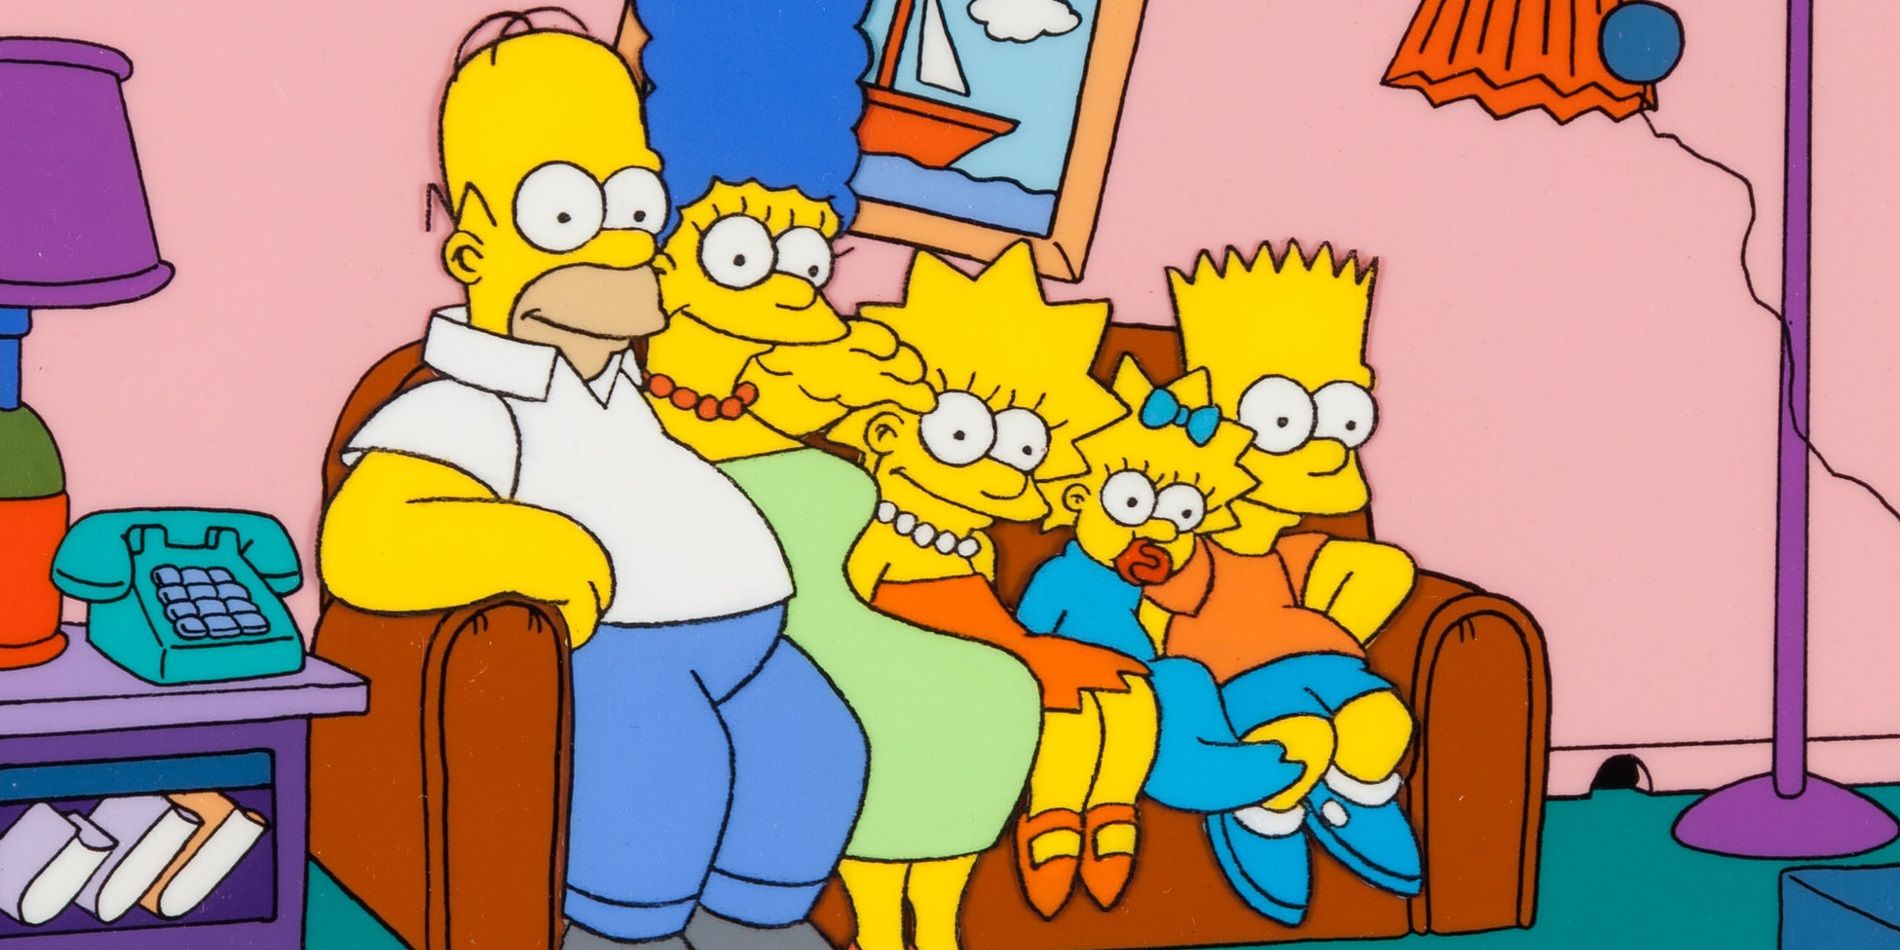 The Simpson family sitting on the couch